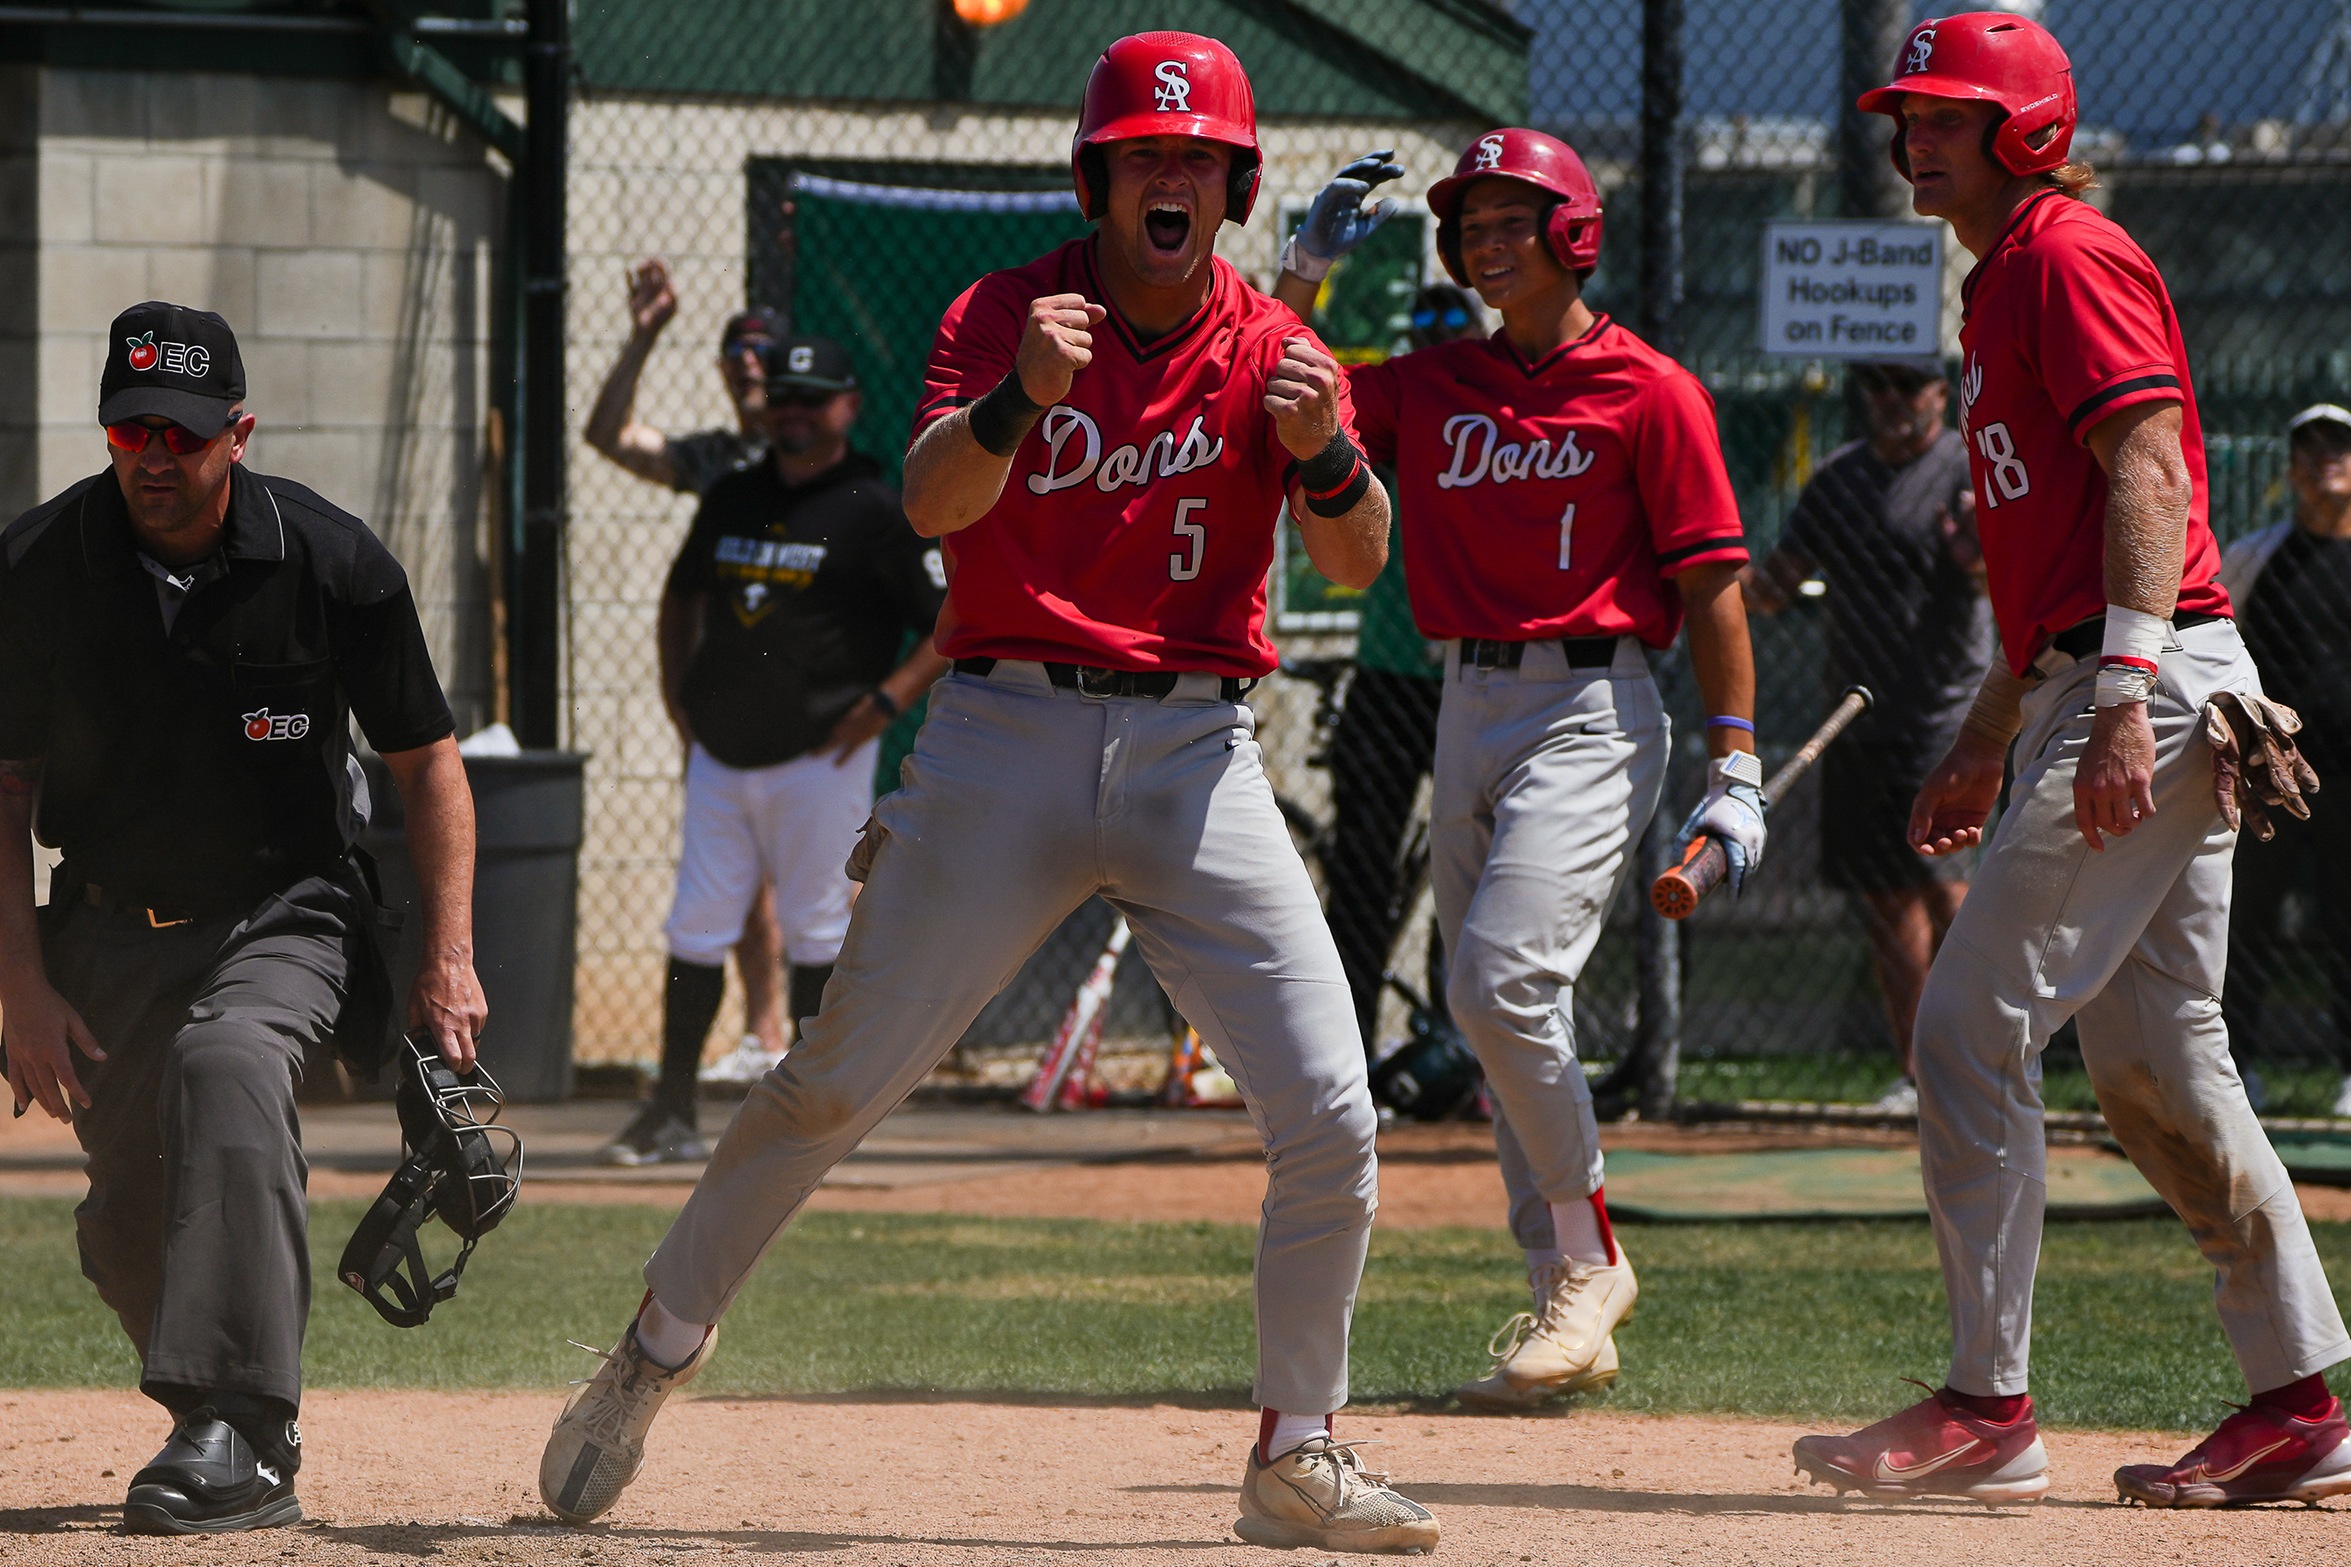 Dons Battle to Reach SoCal Regional Finals, Set for Matchup against No. 2 Palomar